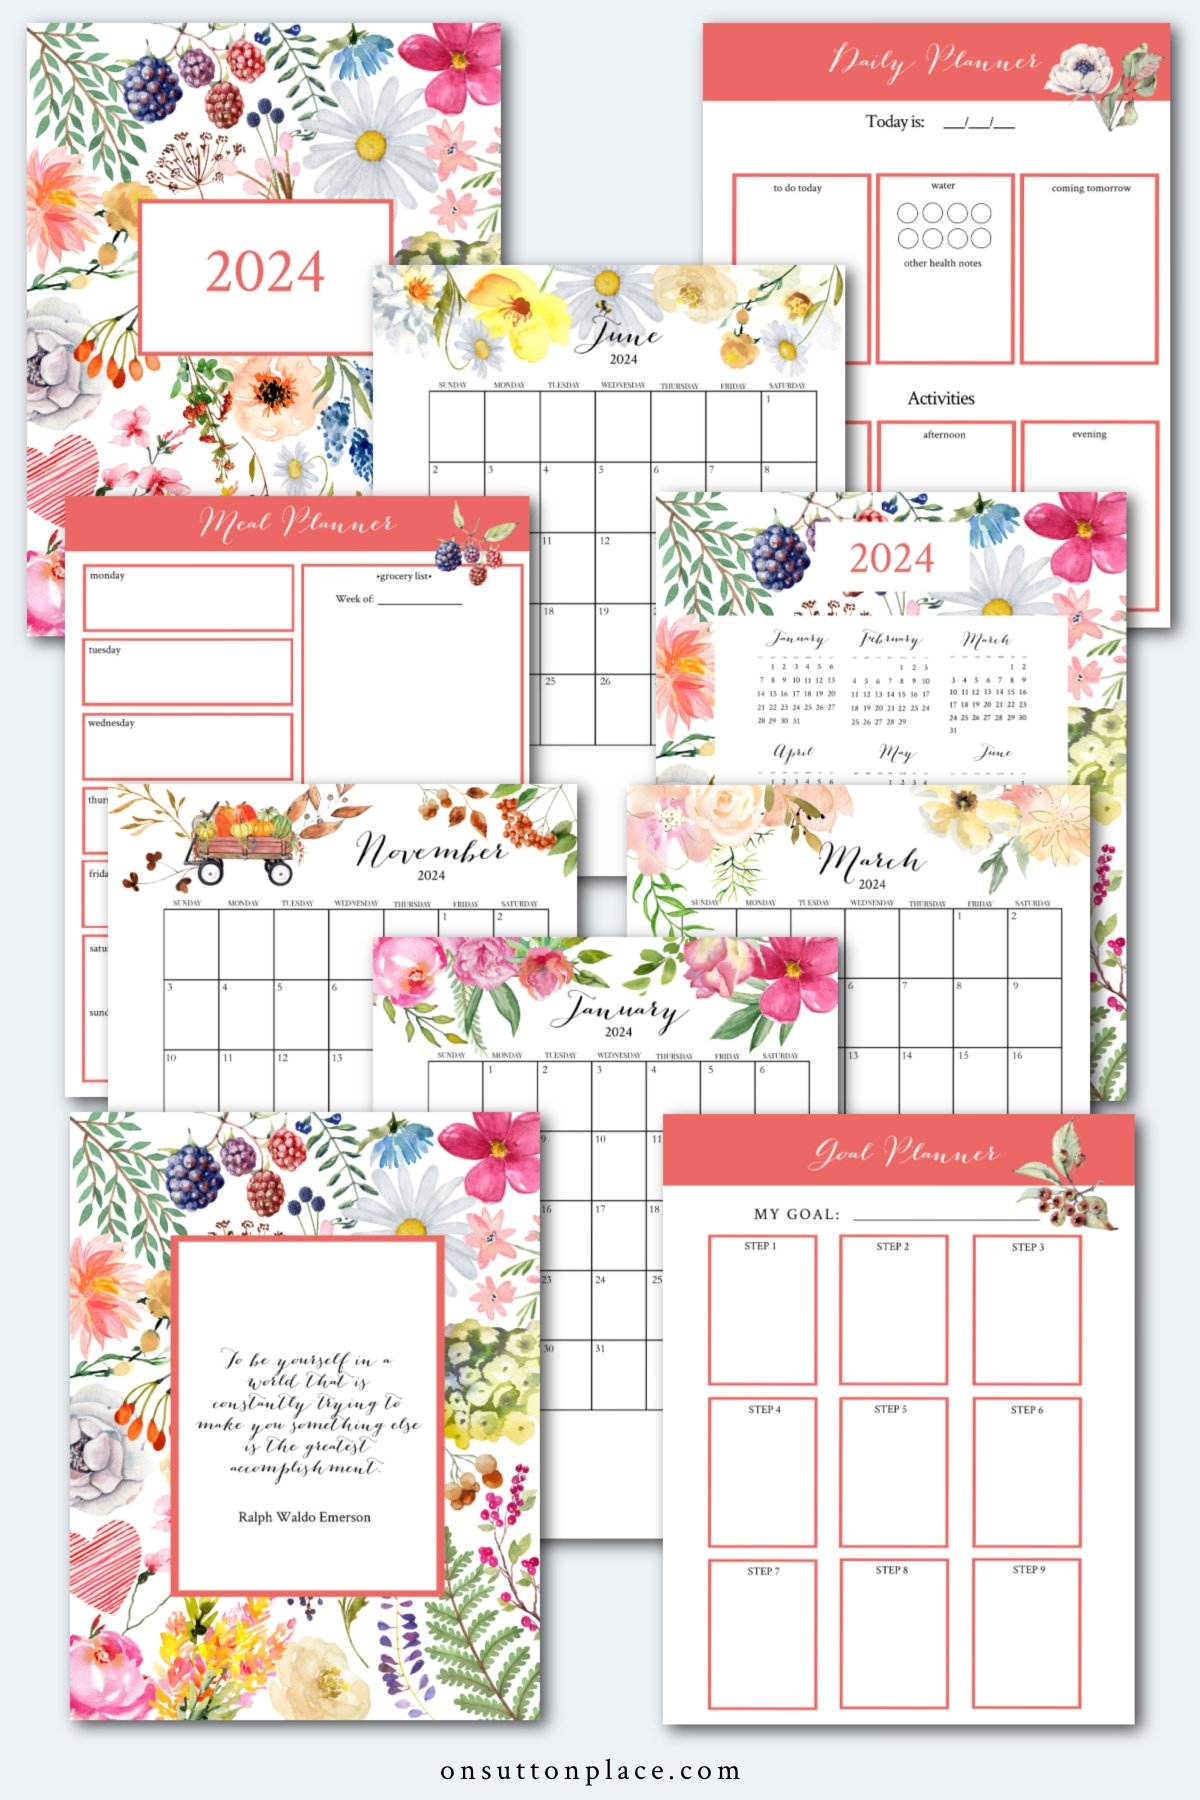 2024 Free Printable Calendar With Planner Pages - On Sutton Place for Free Printable Calendar 2024 With Verses